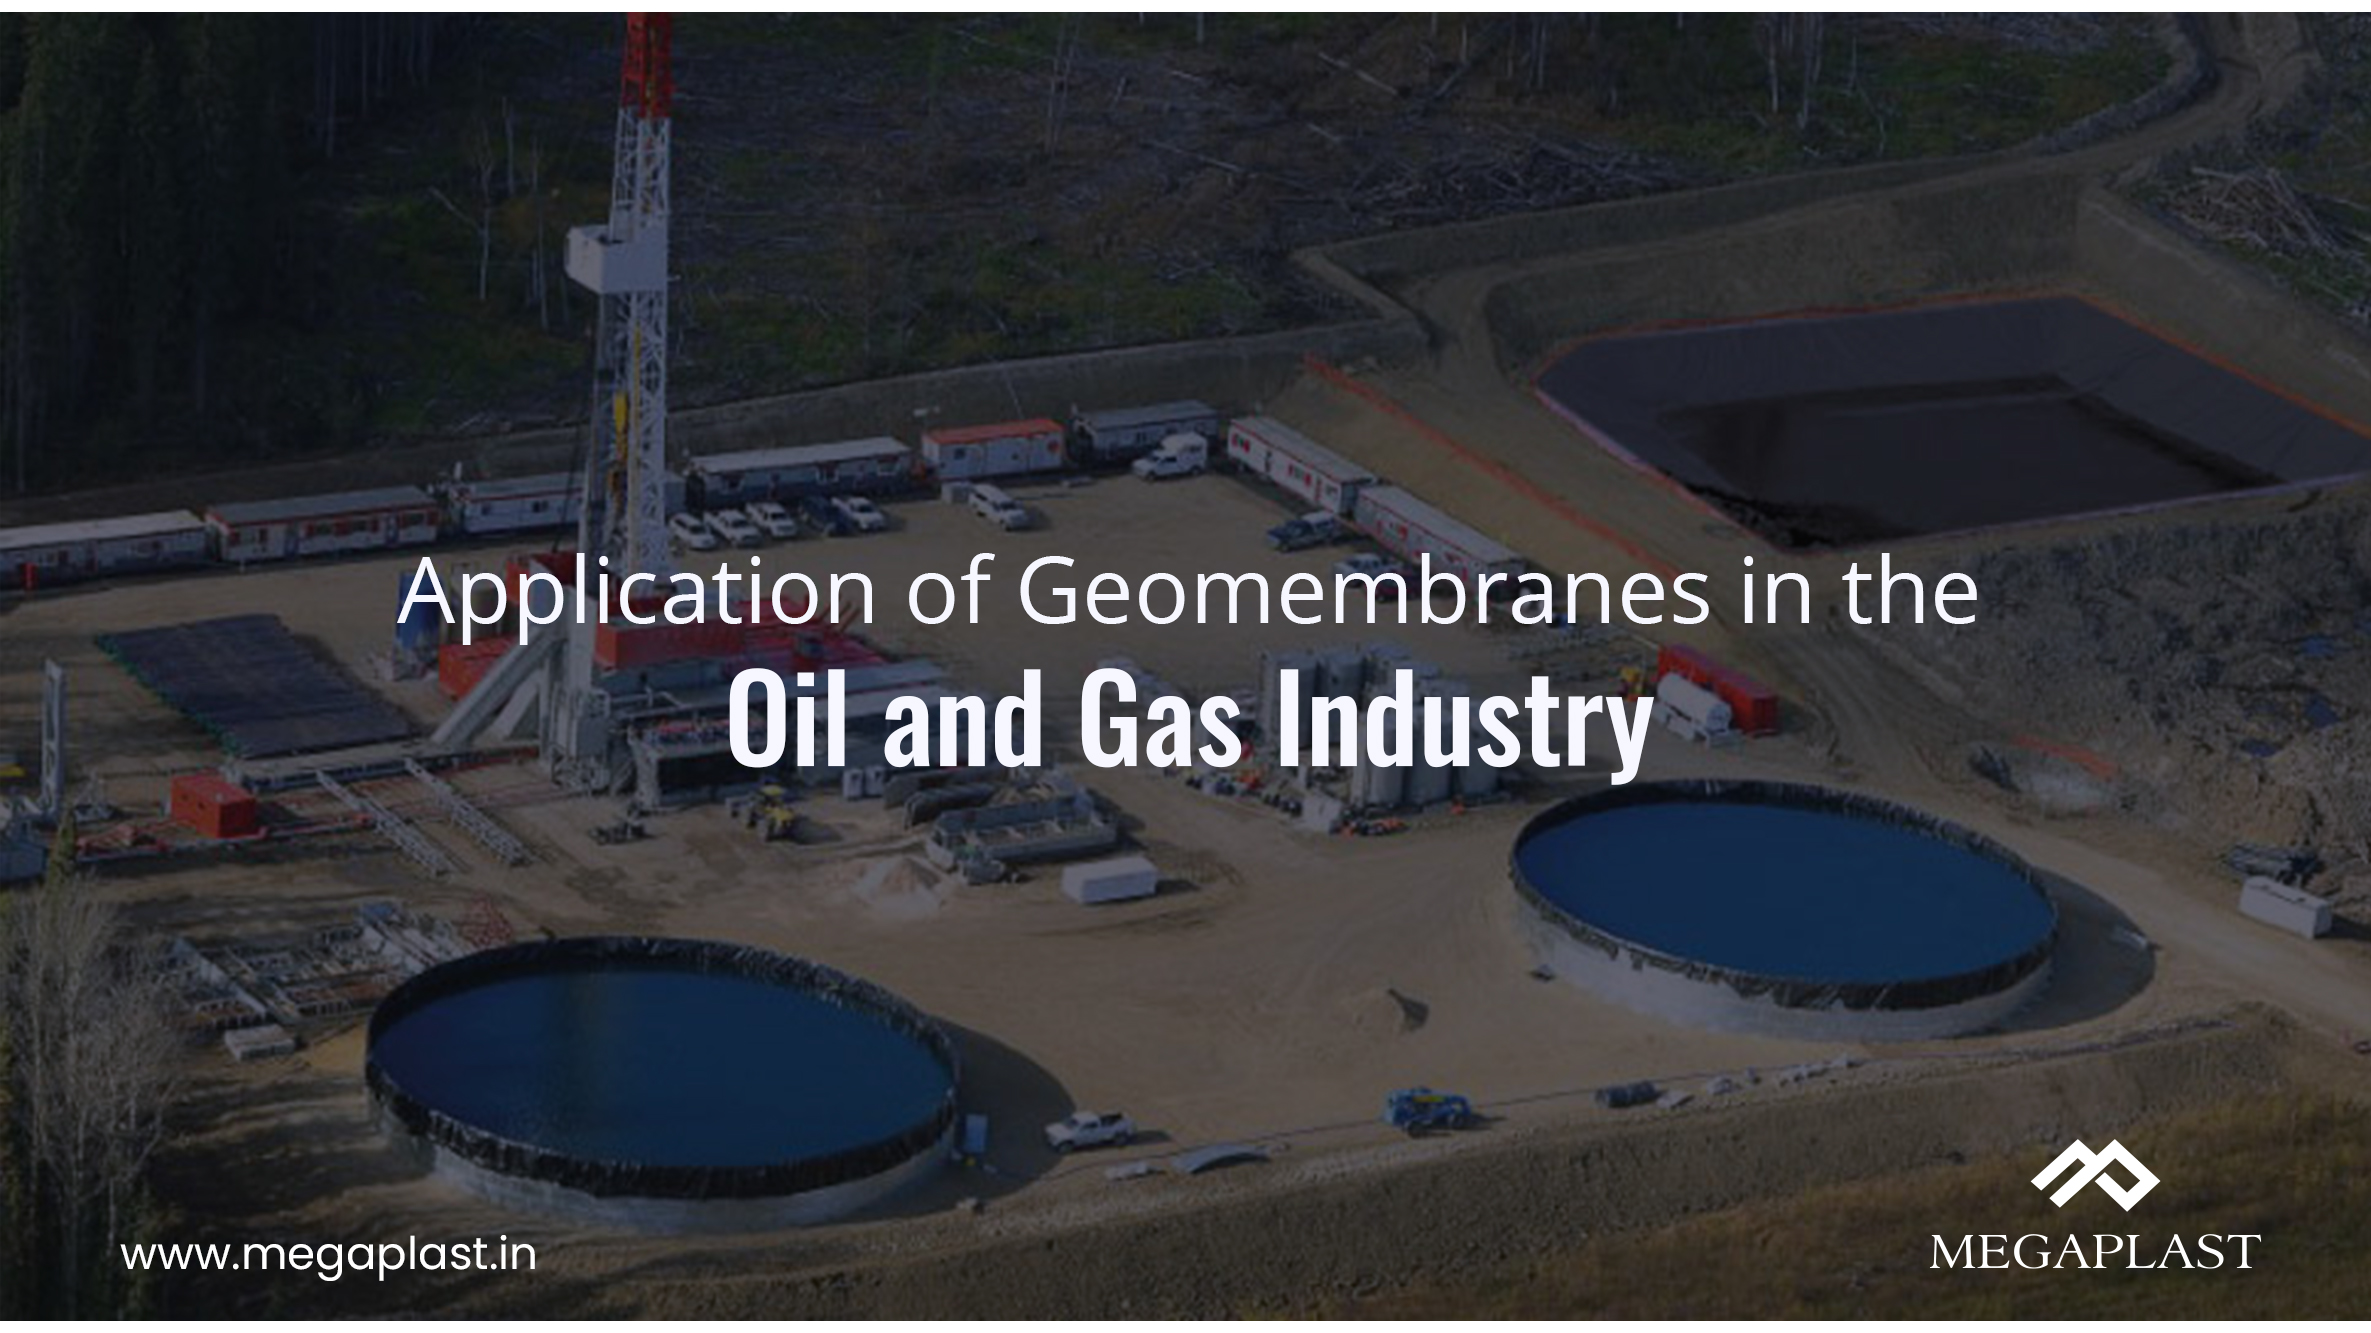 Application of geomembranes in the oil and gas industry